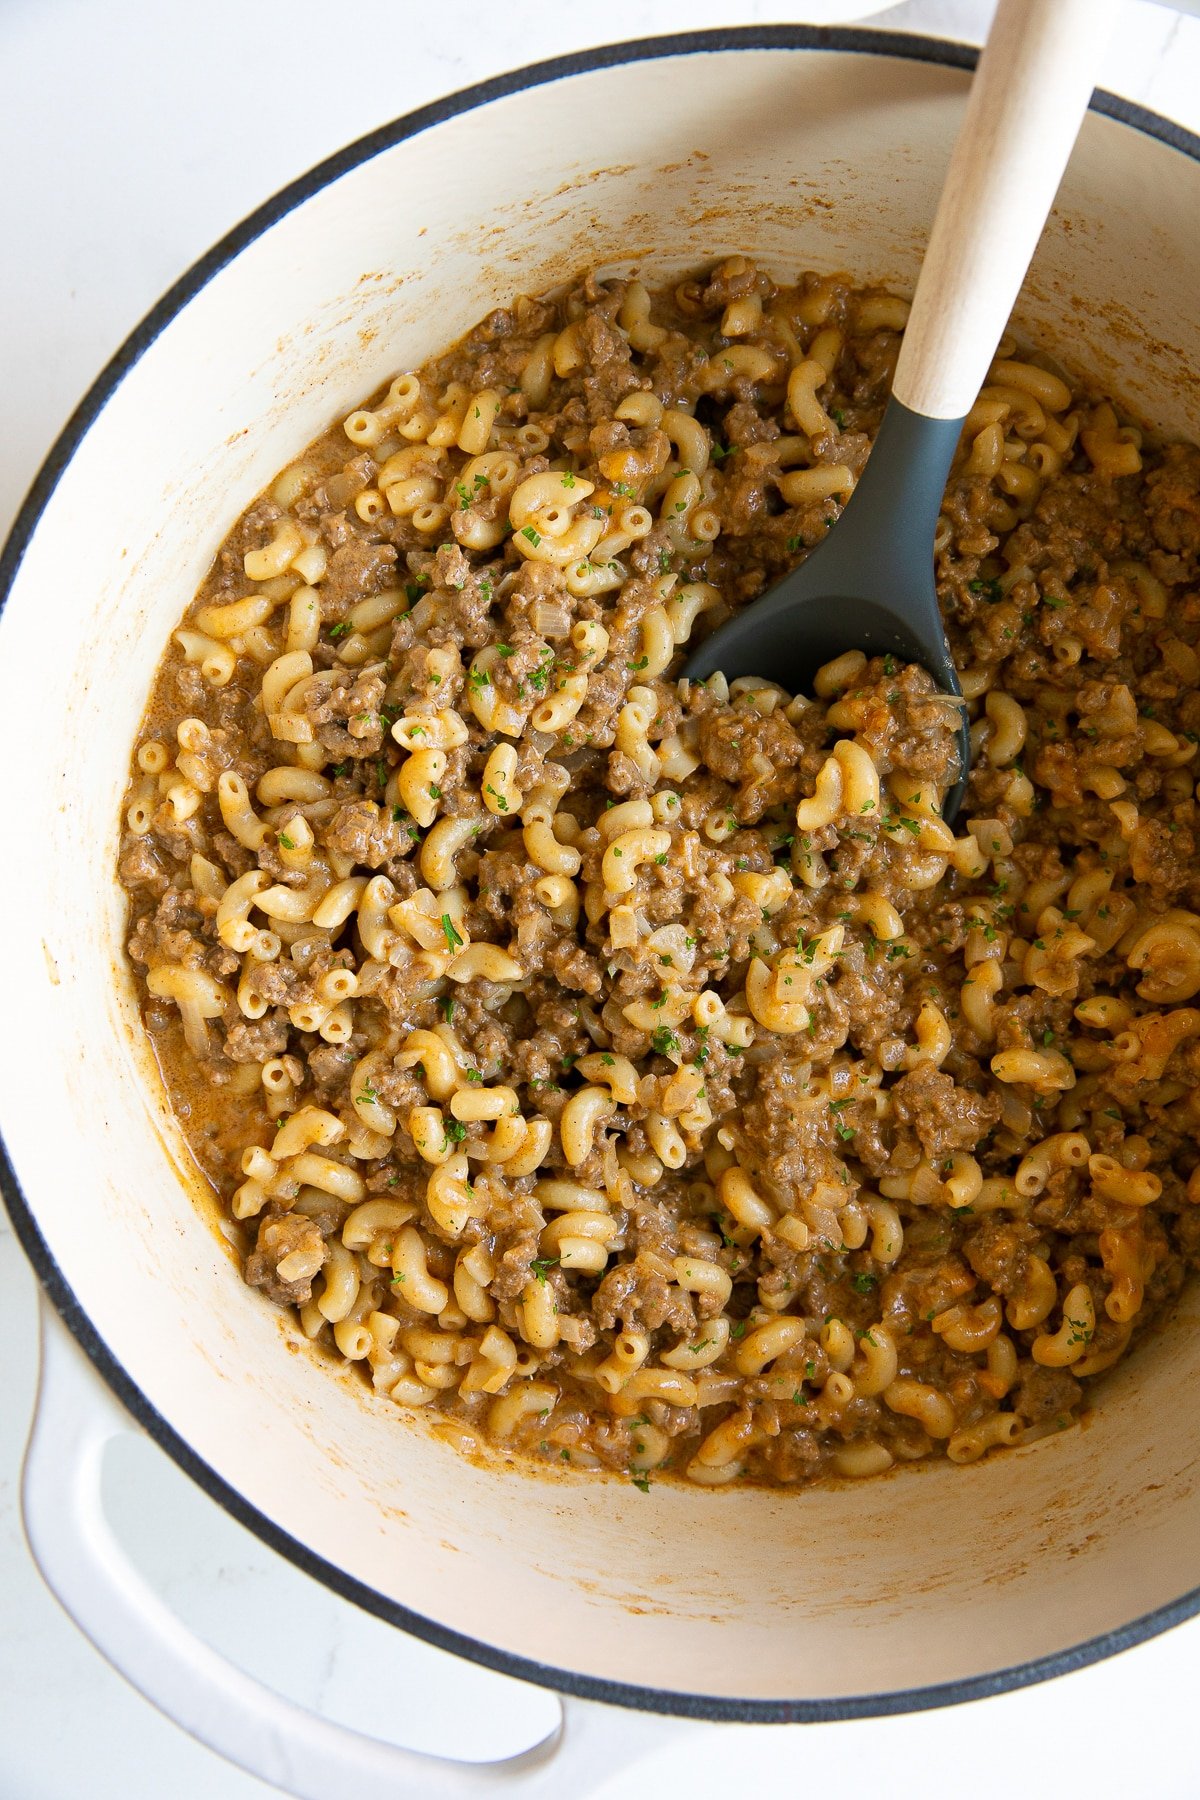 Large white ceramic Dutch oven filled with homemade hamburger helper made with ground beef and macaroni noodles.